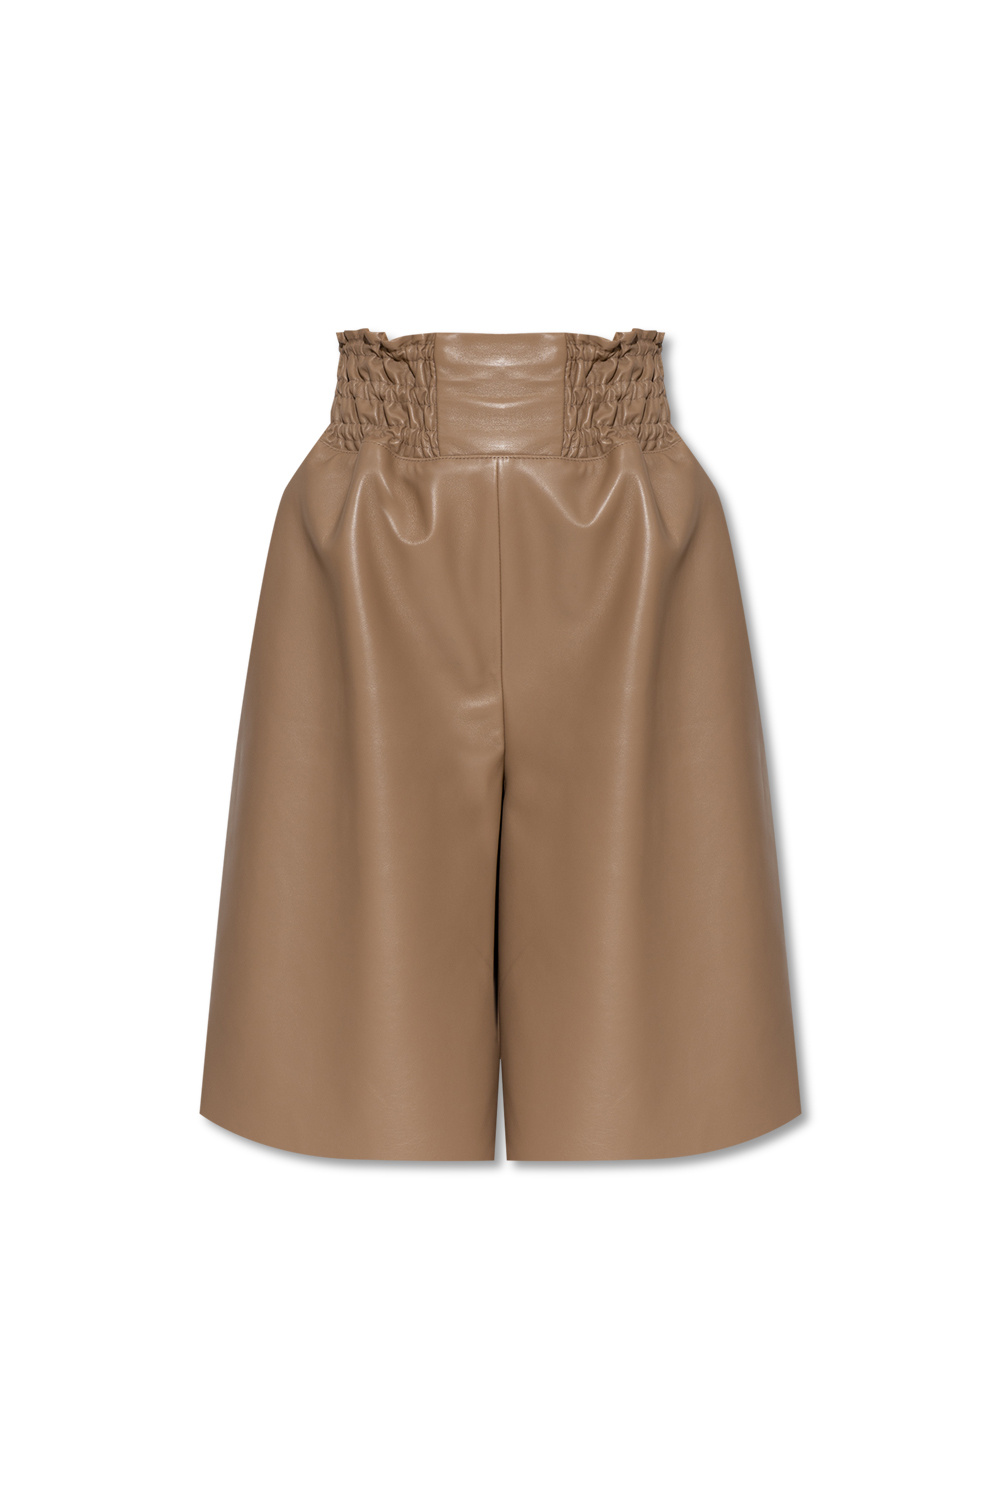 The Mannei ‘Amiens’ leather shorts